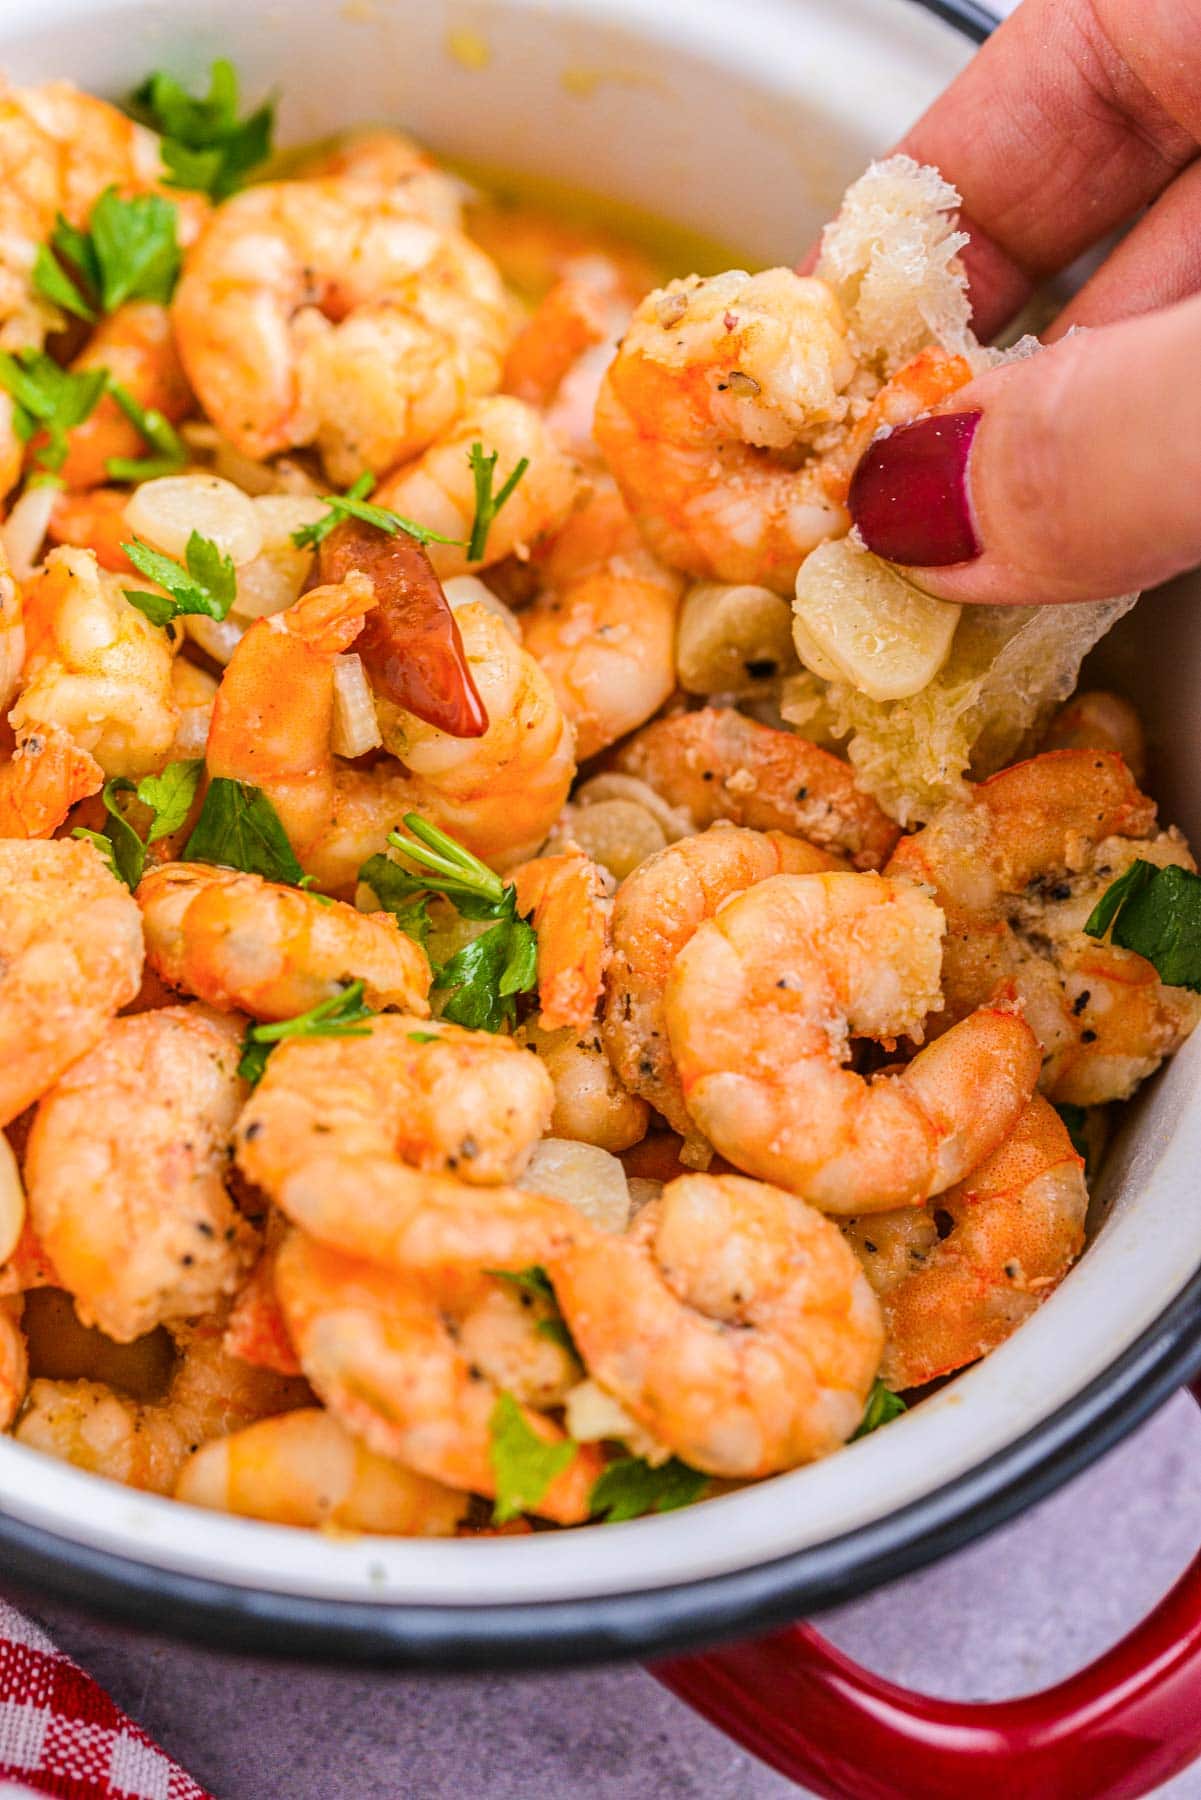 hand dipping bread into bowl of cooked garlic shrimp.